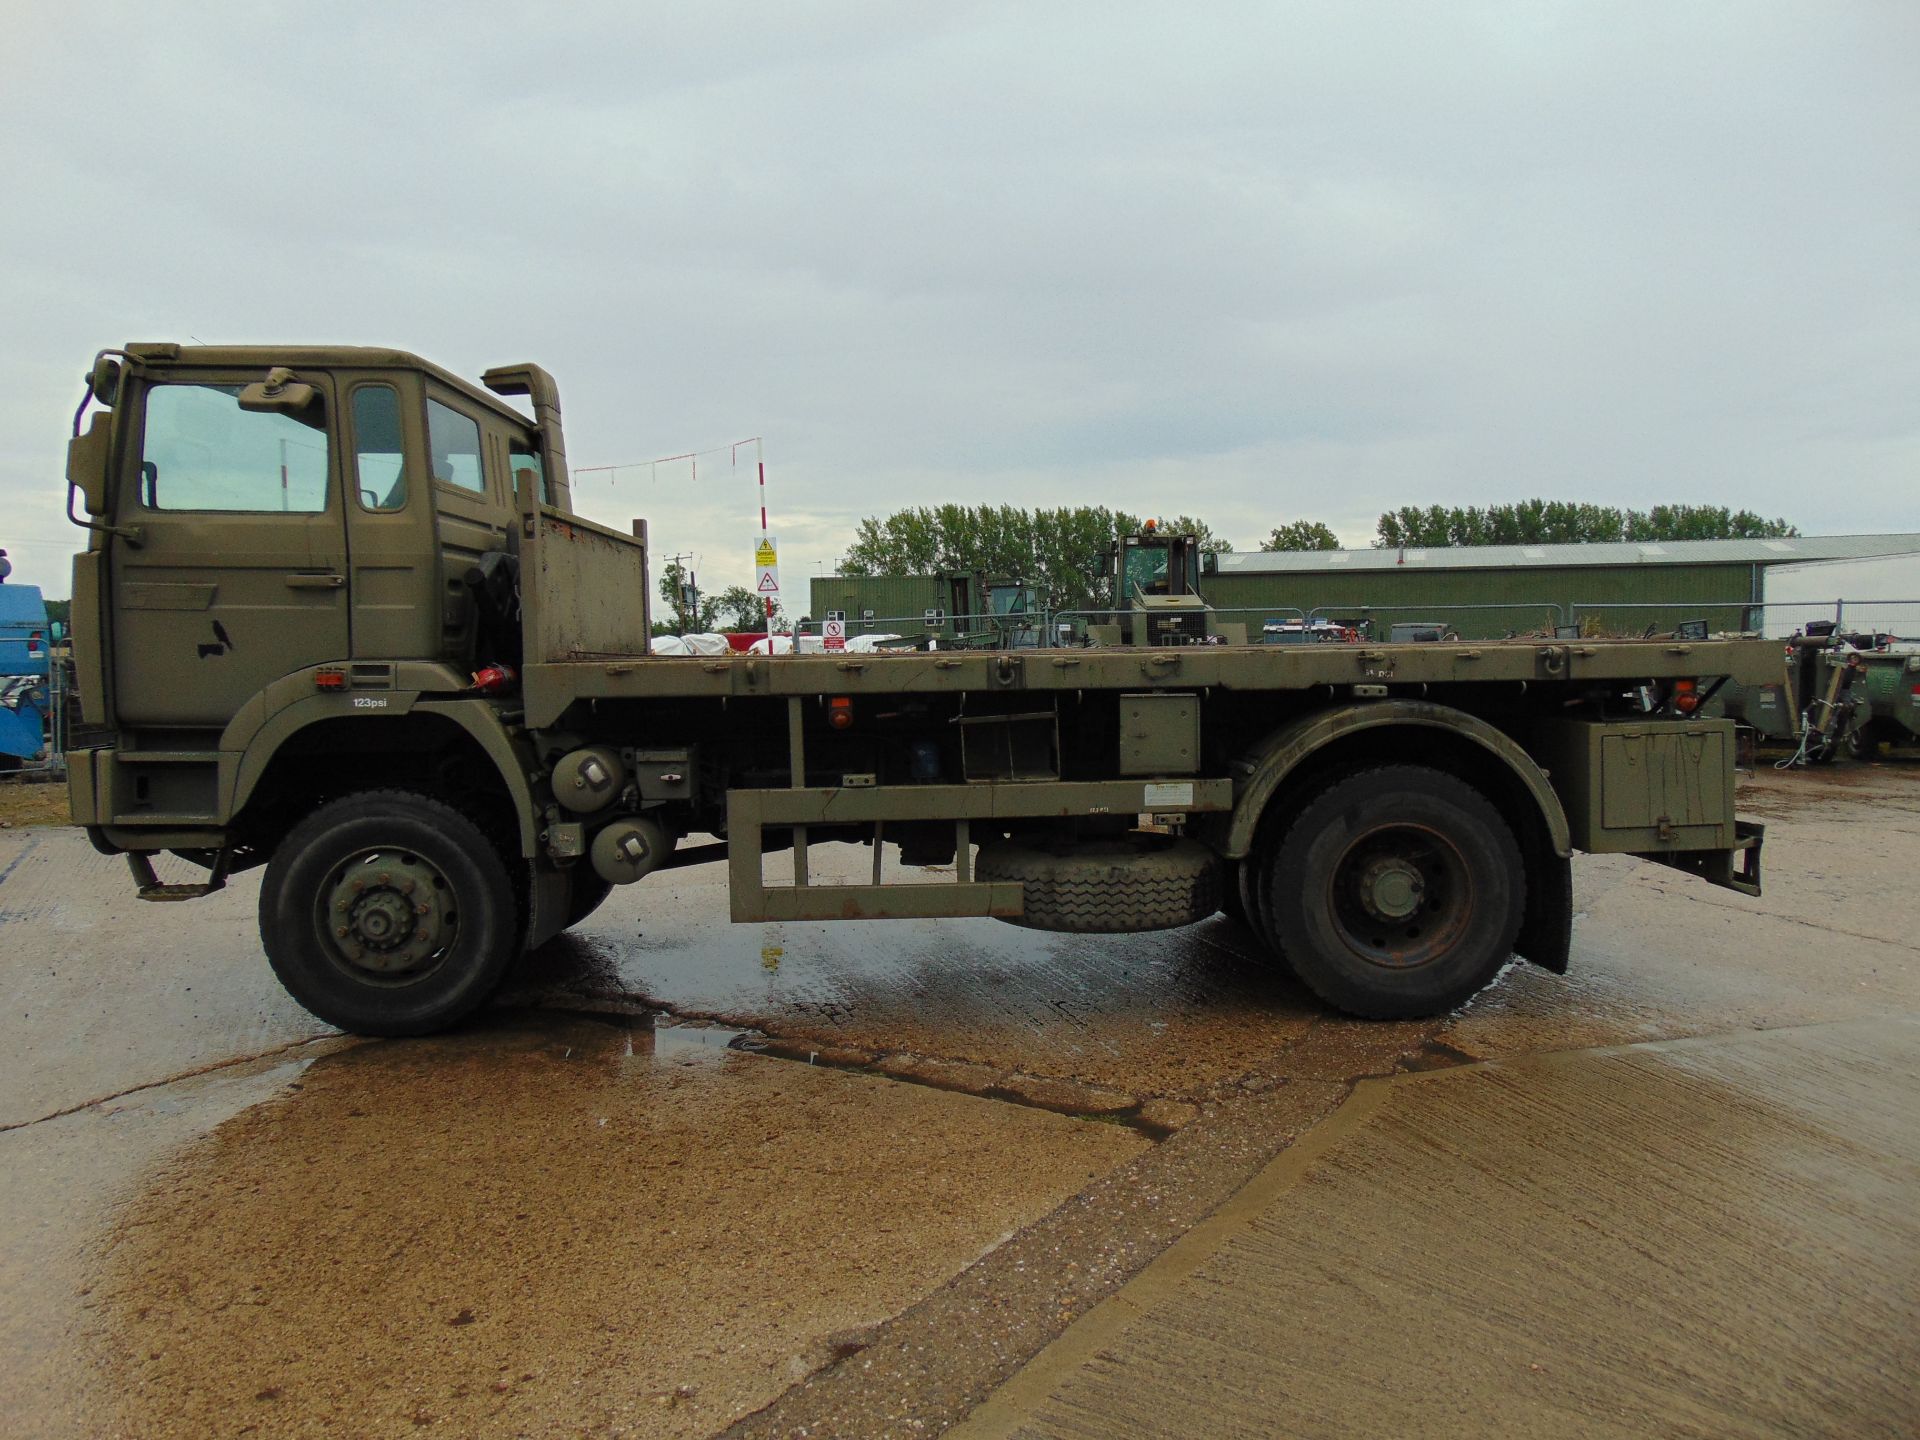 Renault G300 Maxter RHD 4x4 8T Cargo Truck complete with winch - Image 4 of 16